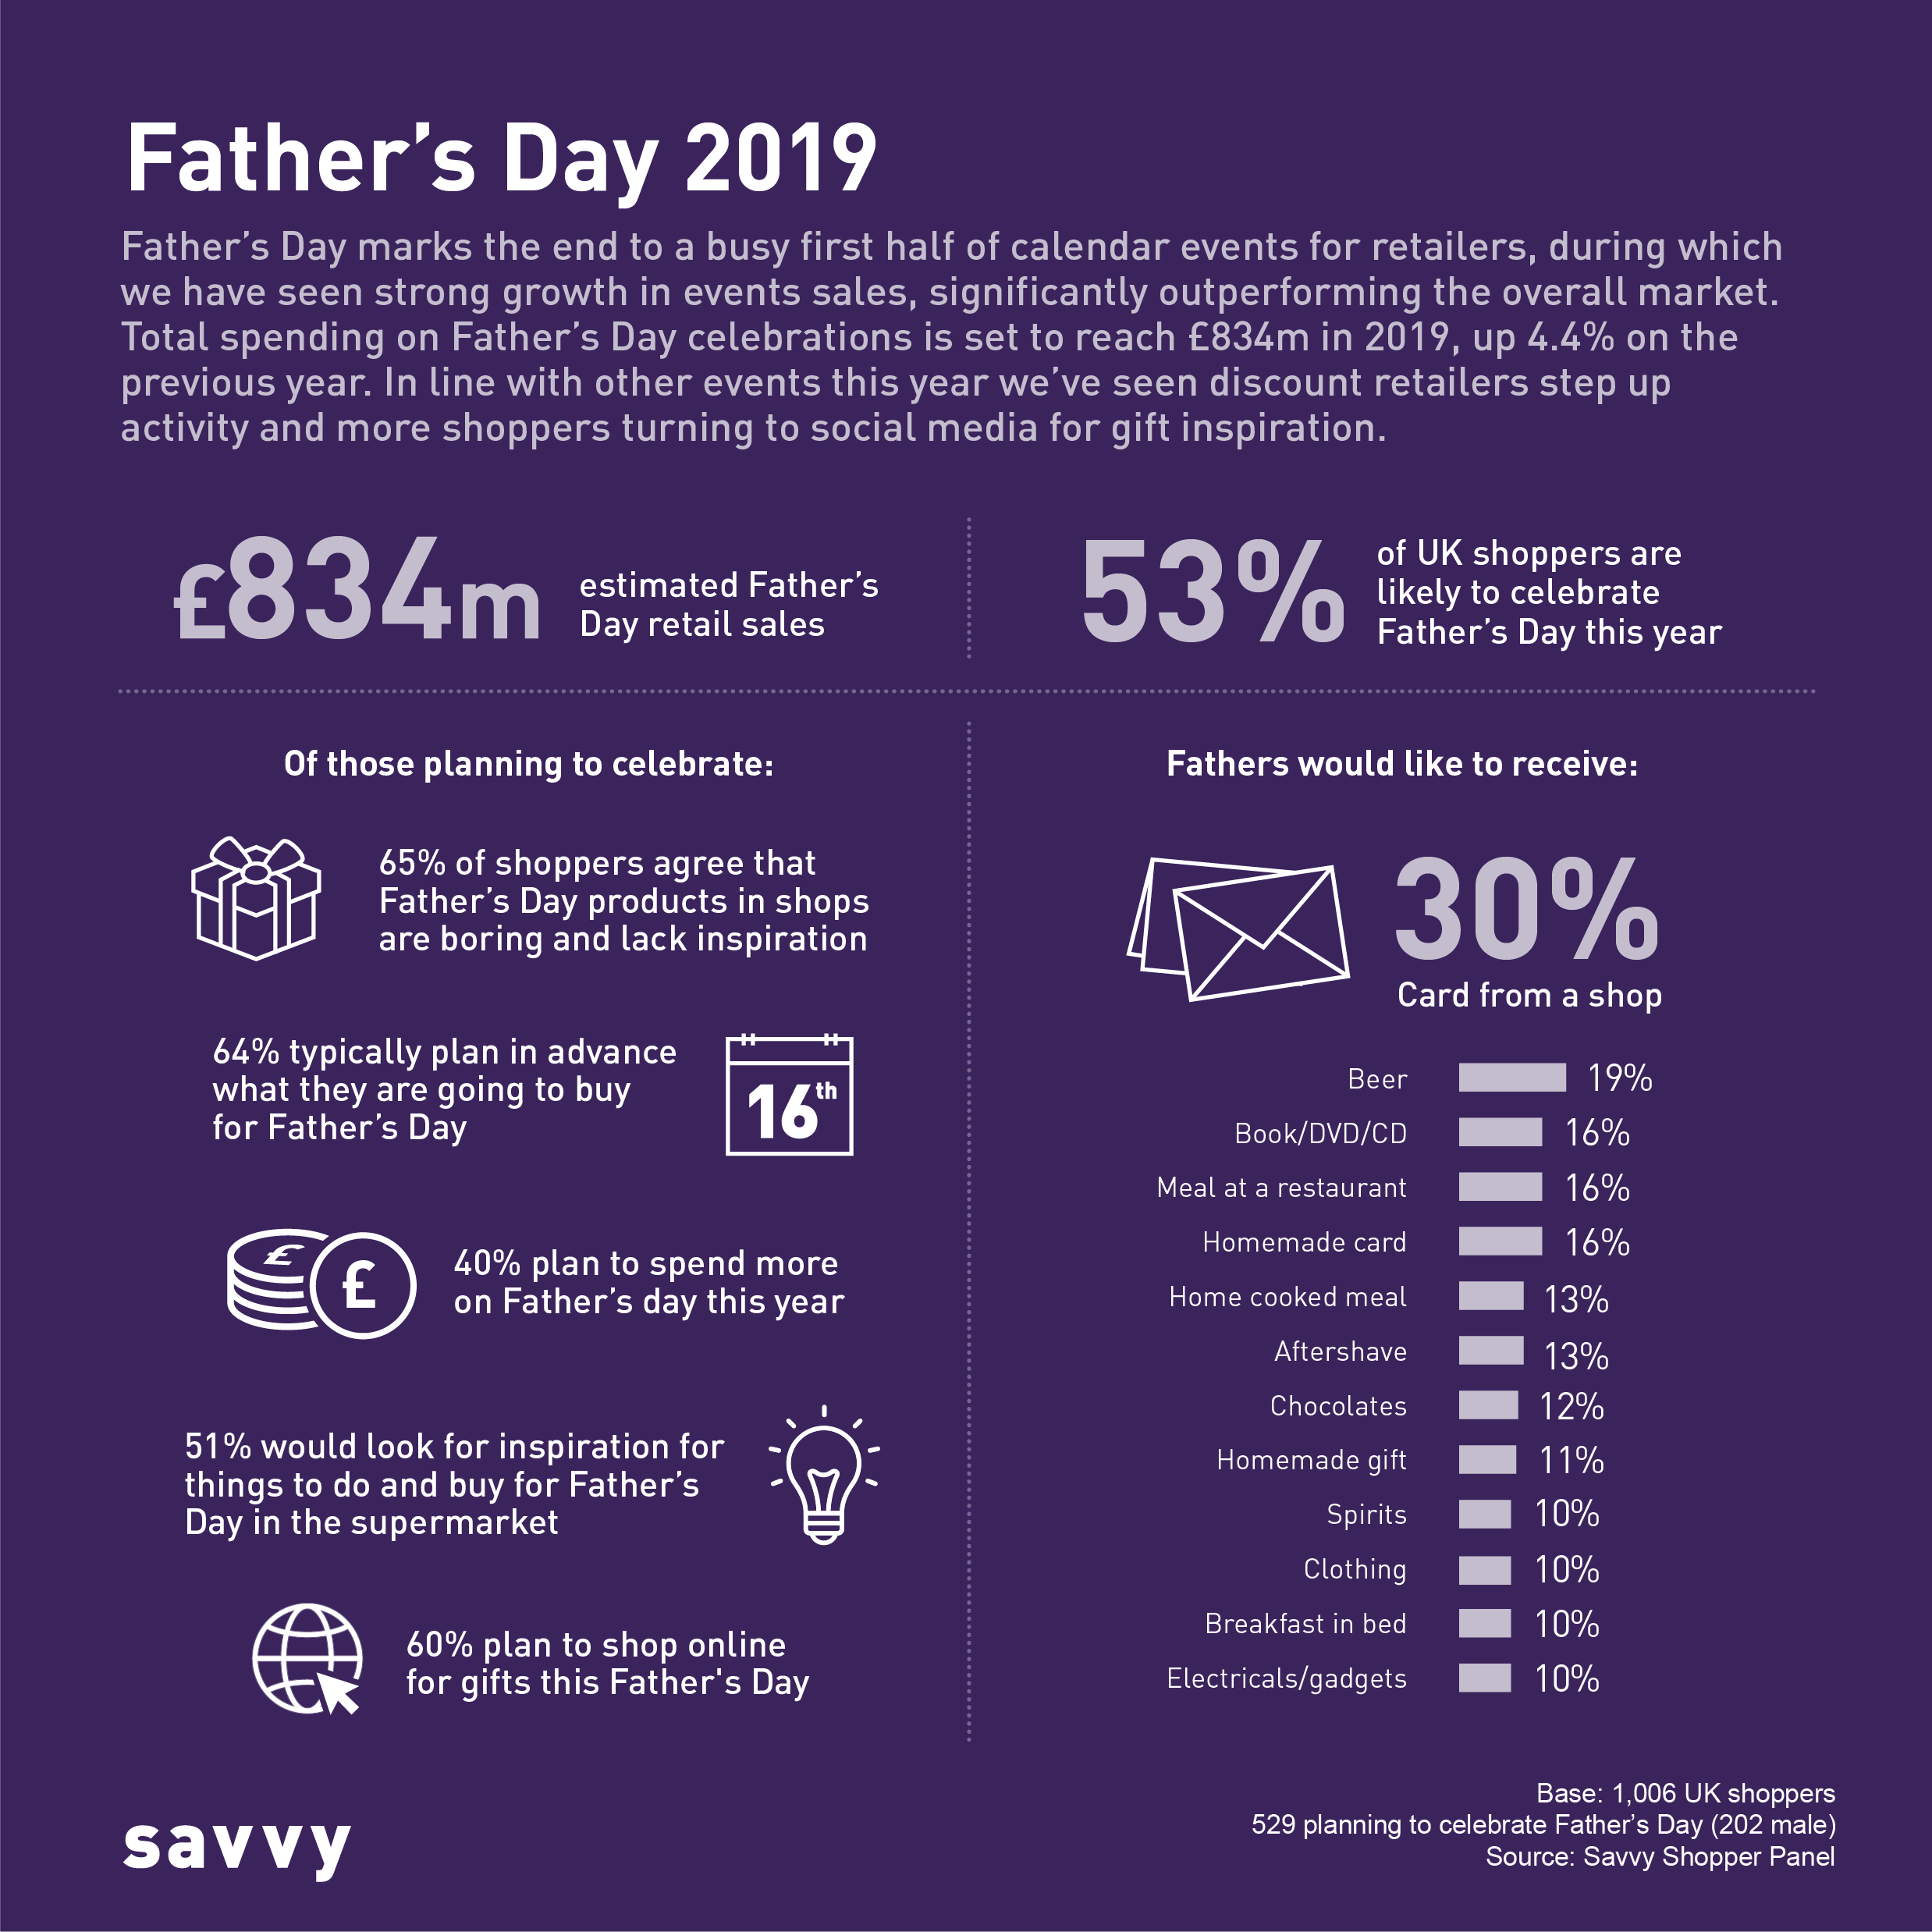 2019 Infographic - Savvy on Fathers Day Shoppers